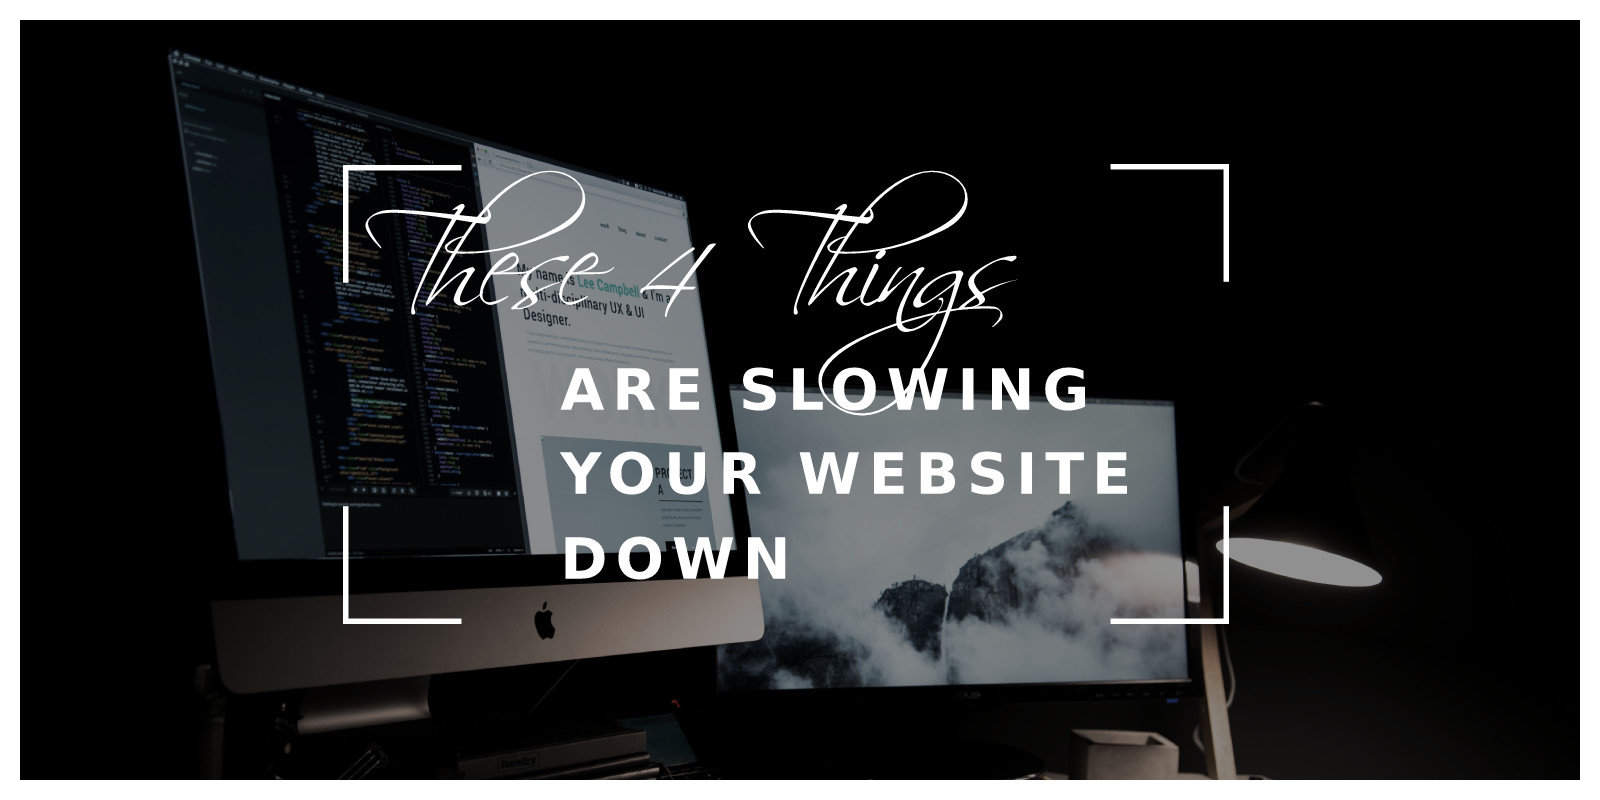 These 4 Things Are Slowing Your Website Down